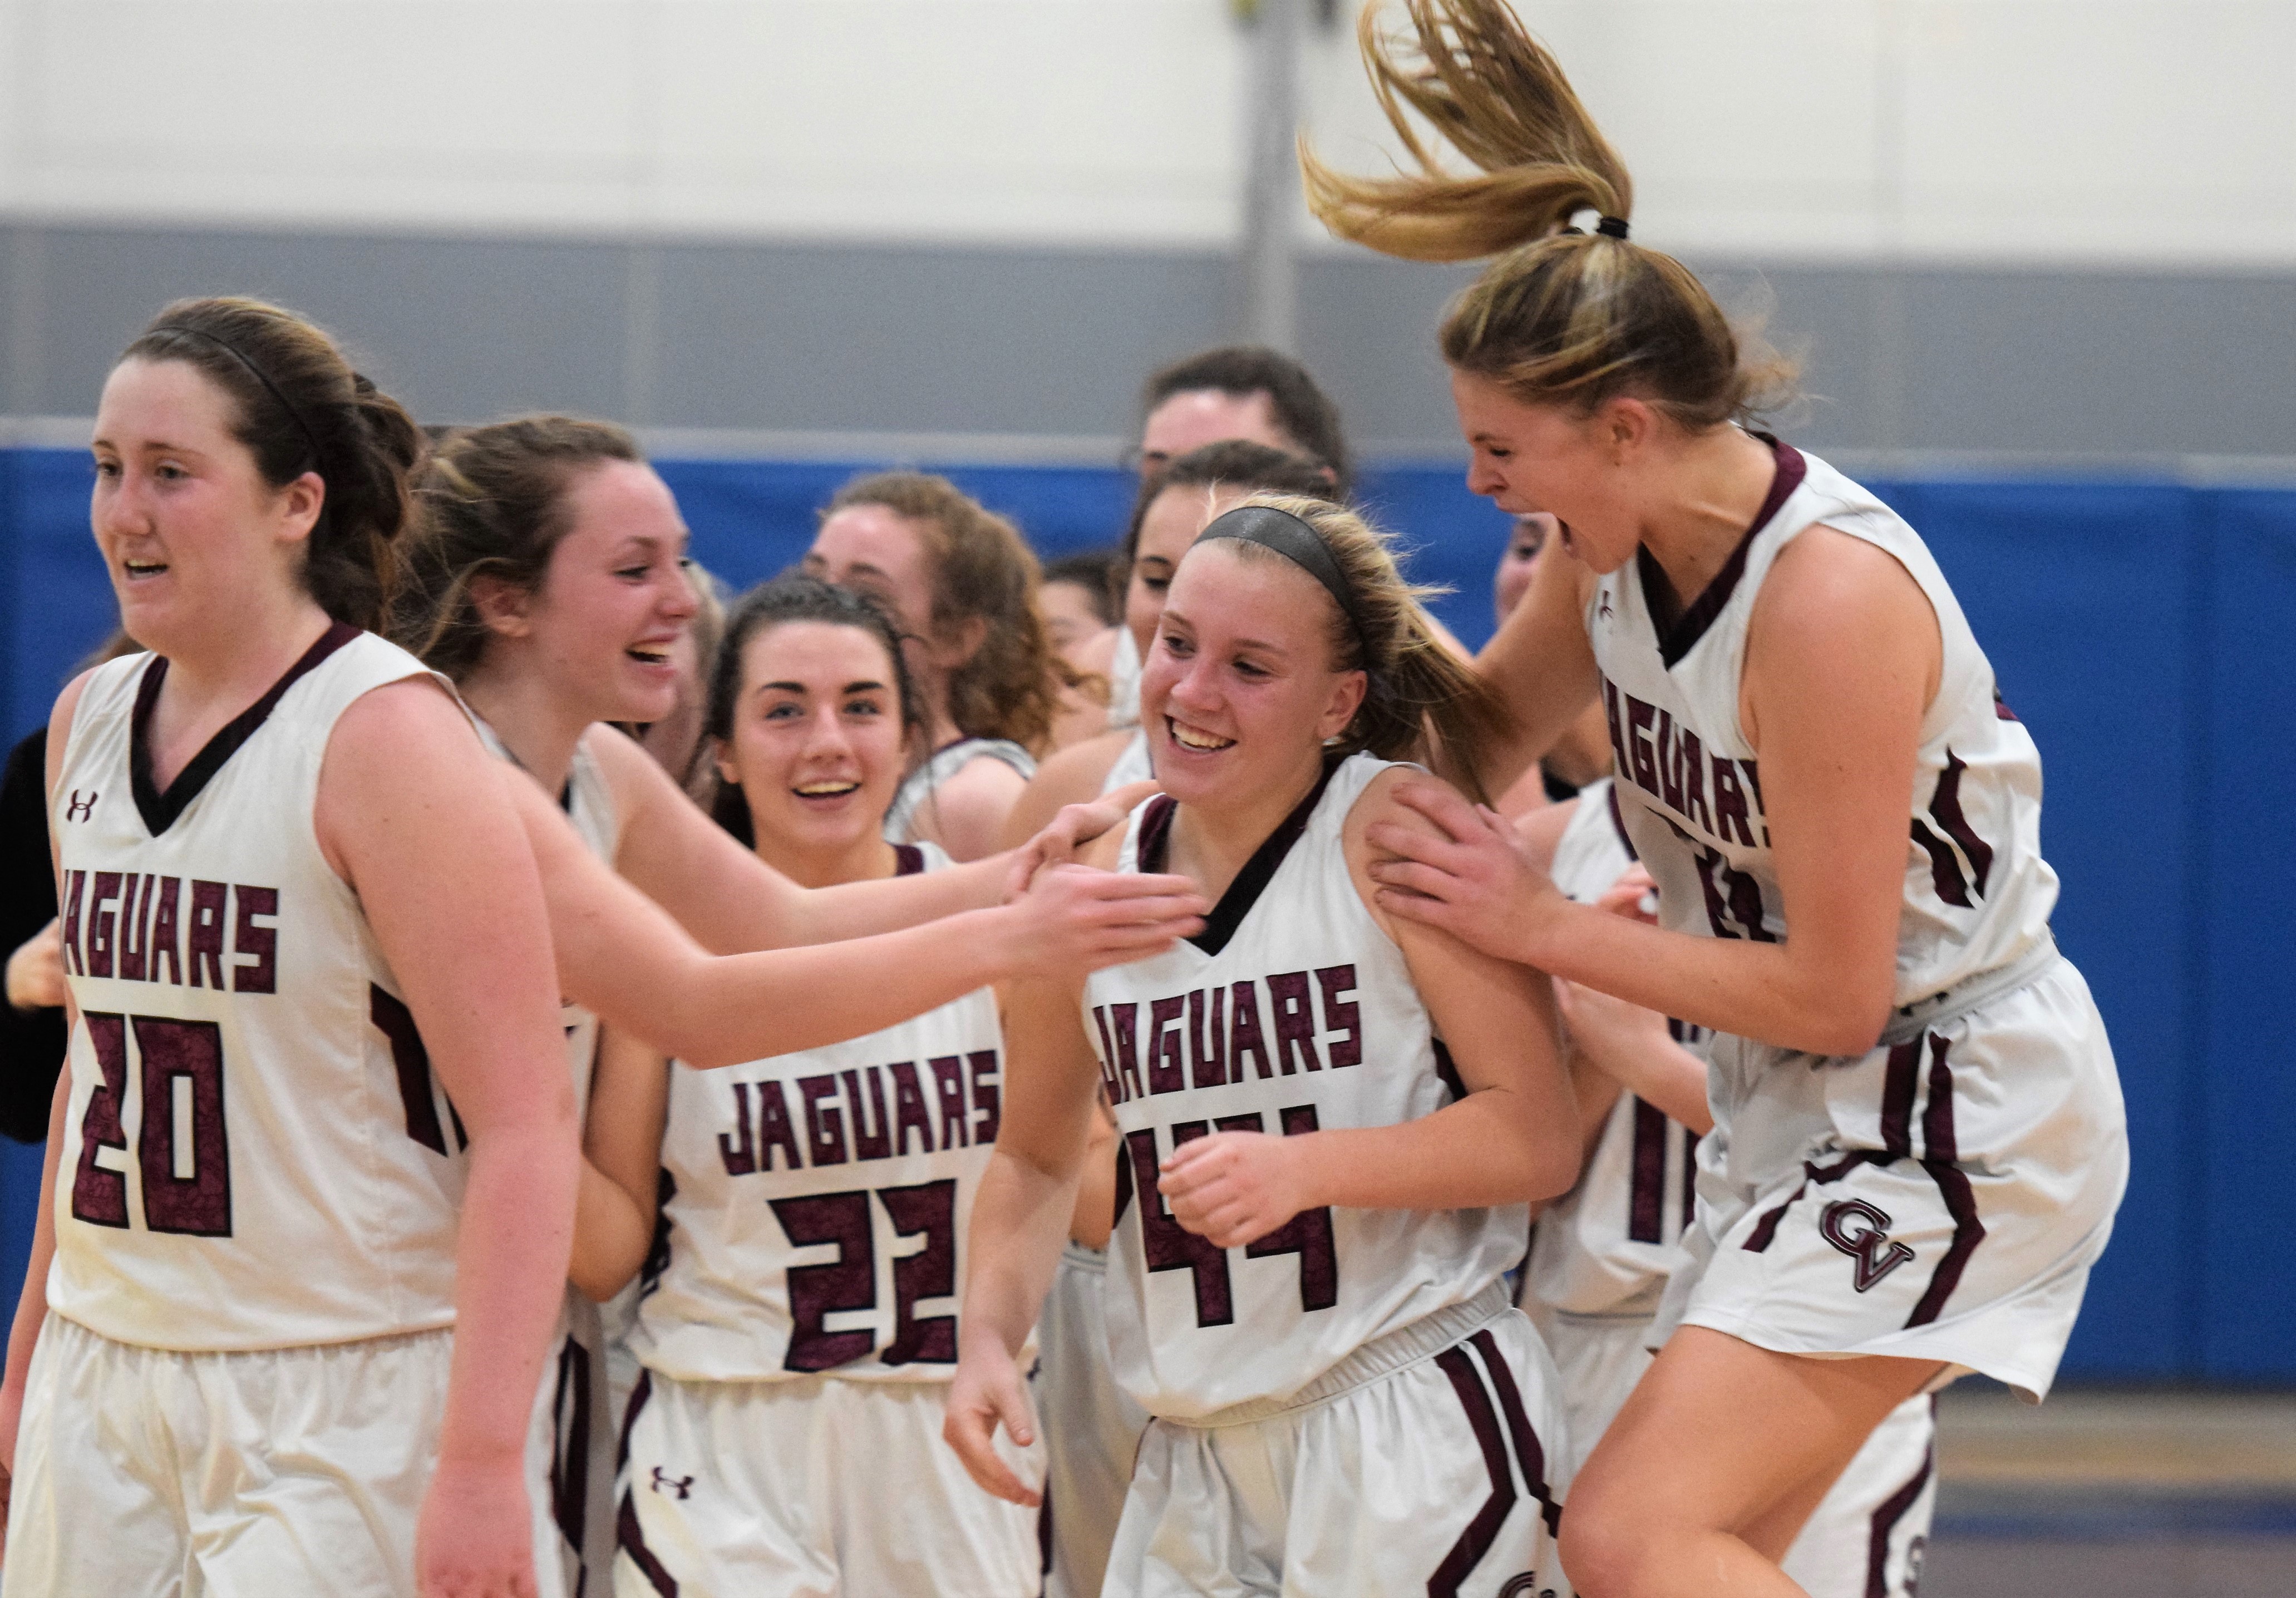 Garnet Valley secures first district title appearance with win over